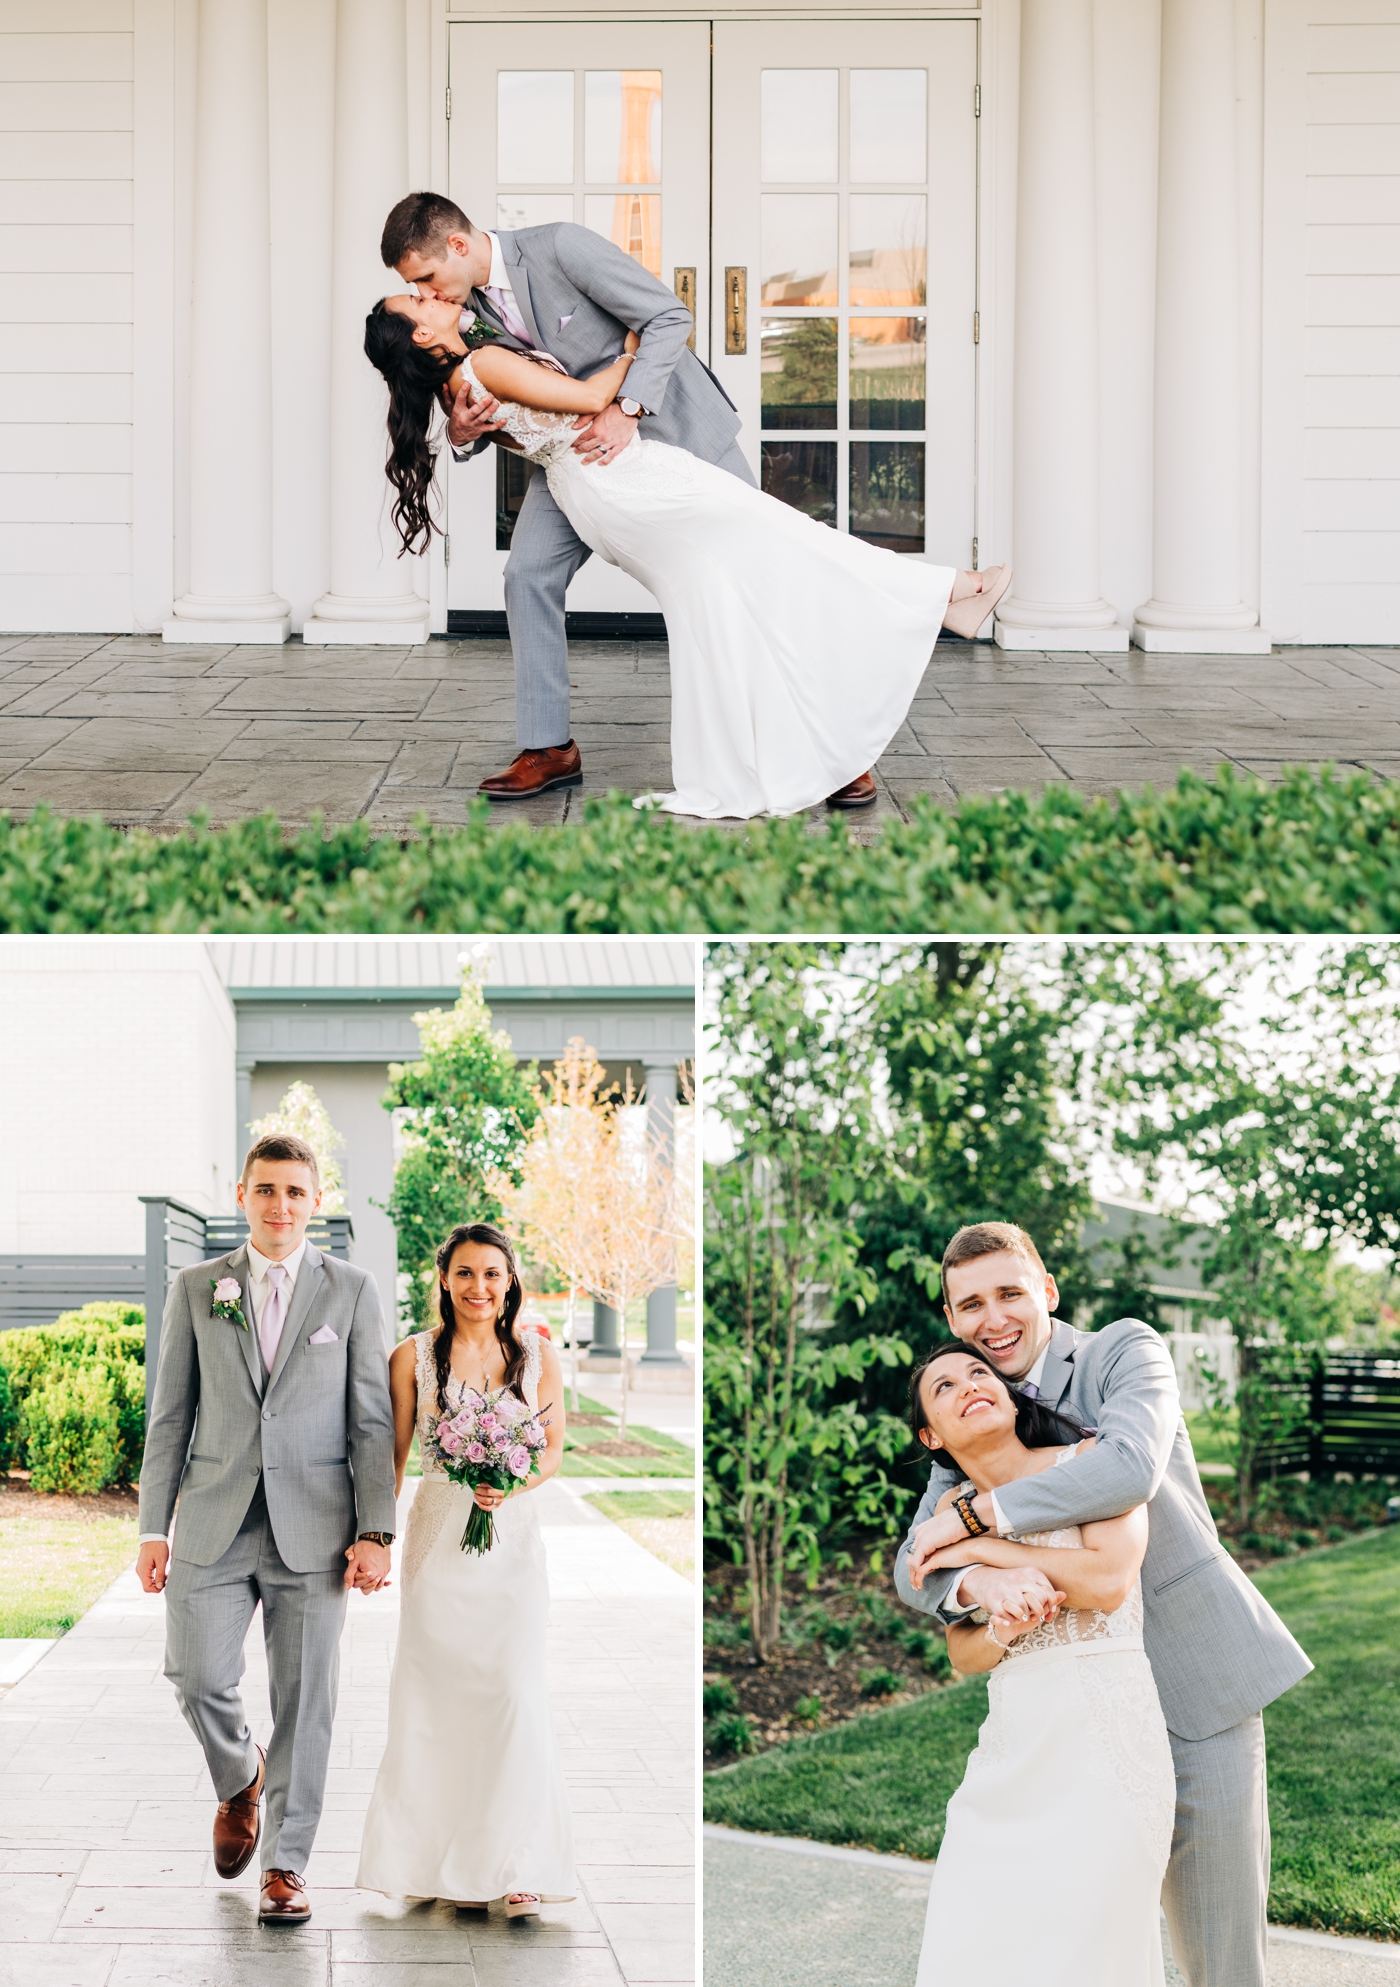 Bride and groom portraits at Ritz Charles Gardens